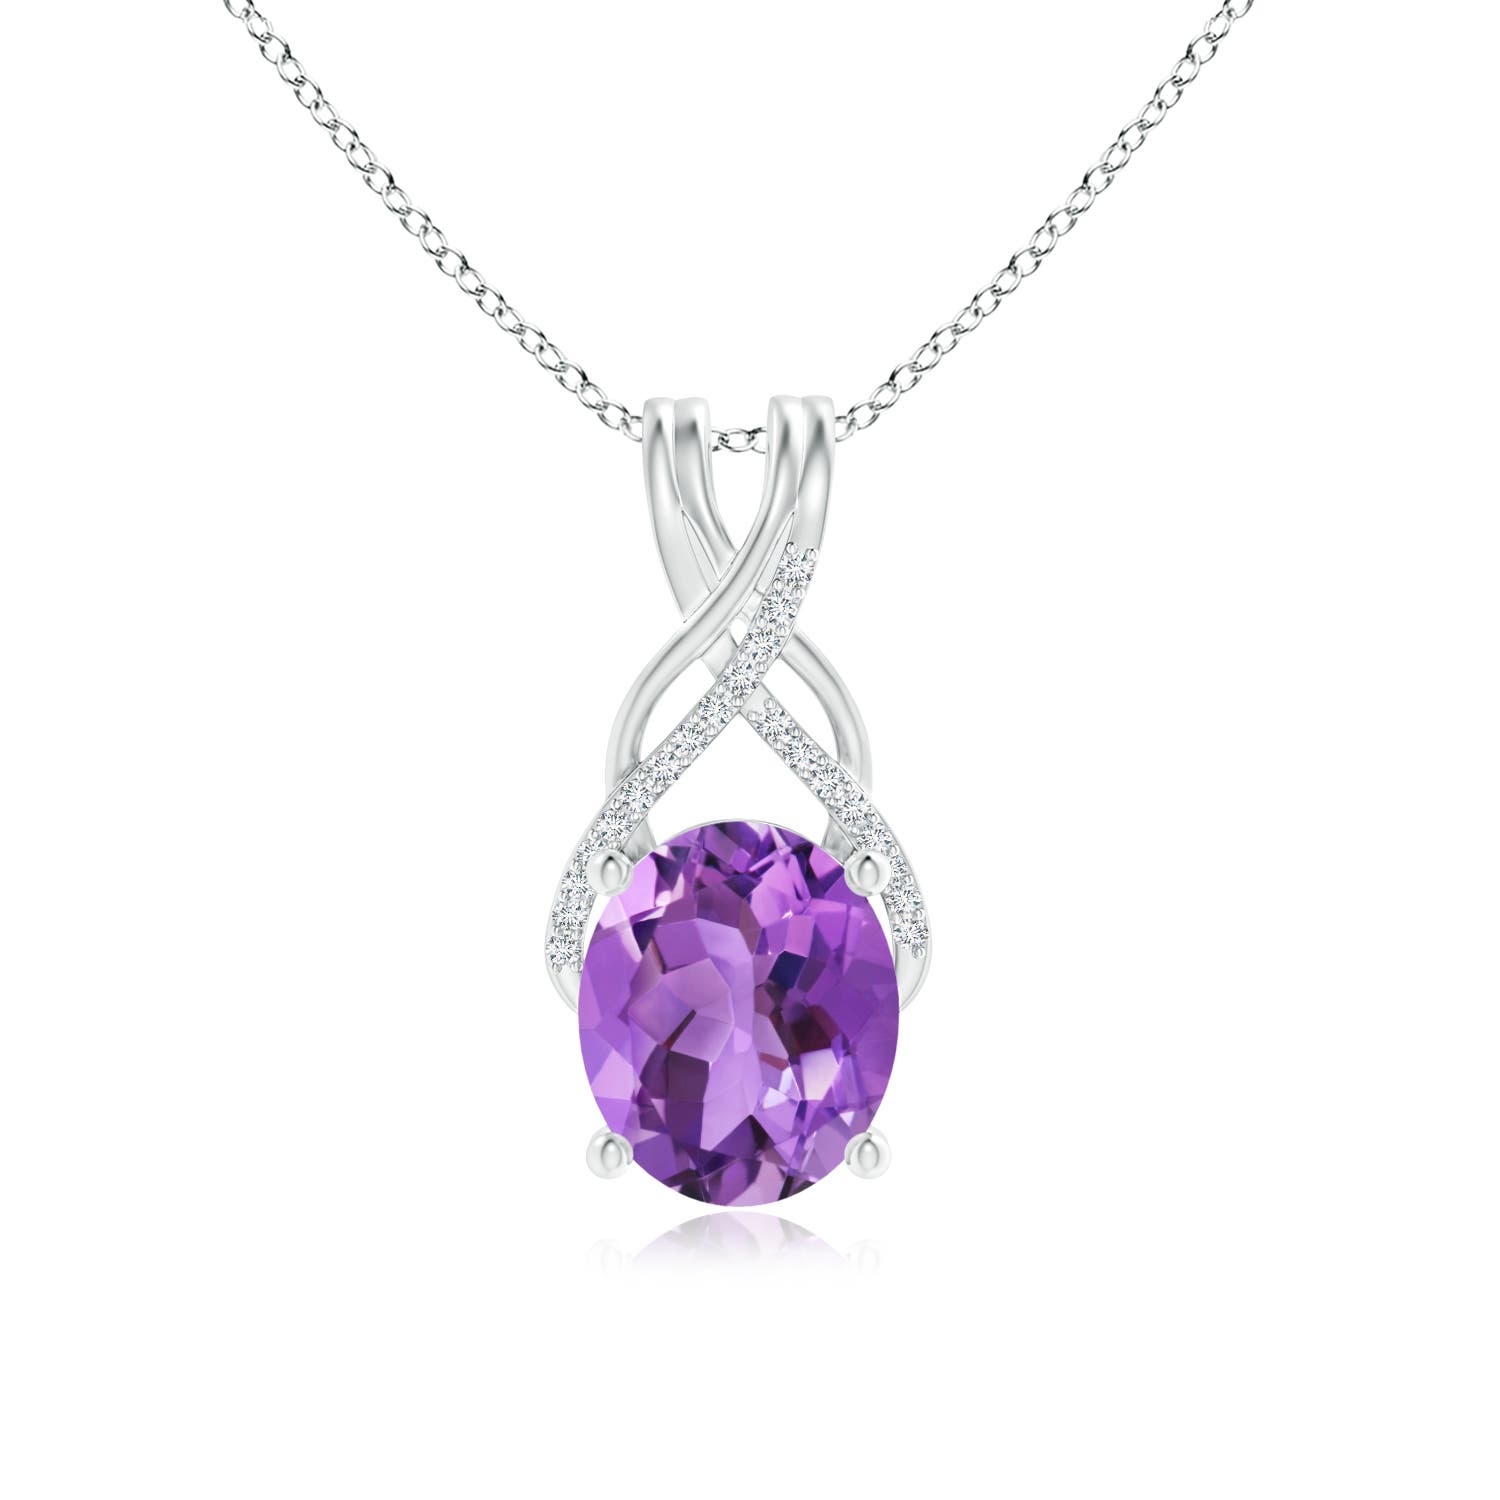 AA - Amethyst / 4.43 CT / 14 KT White Gold